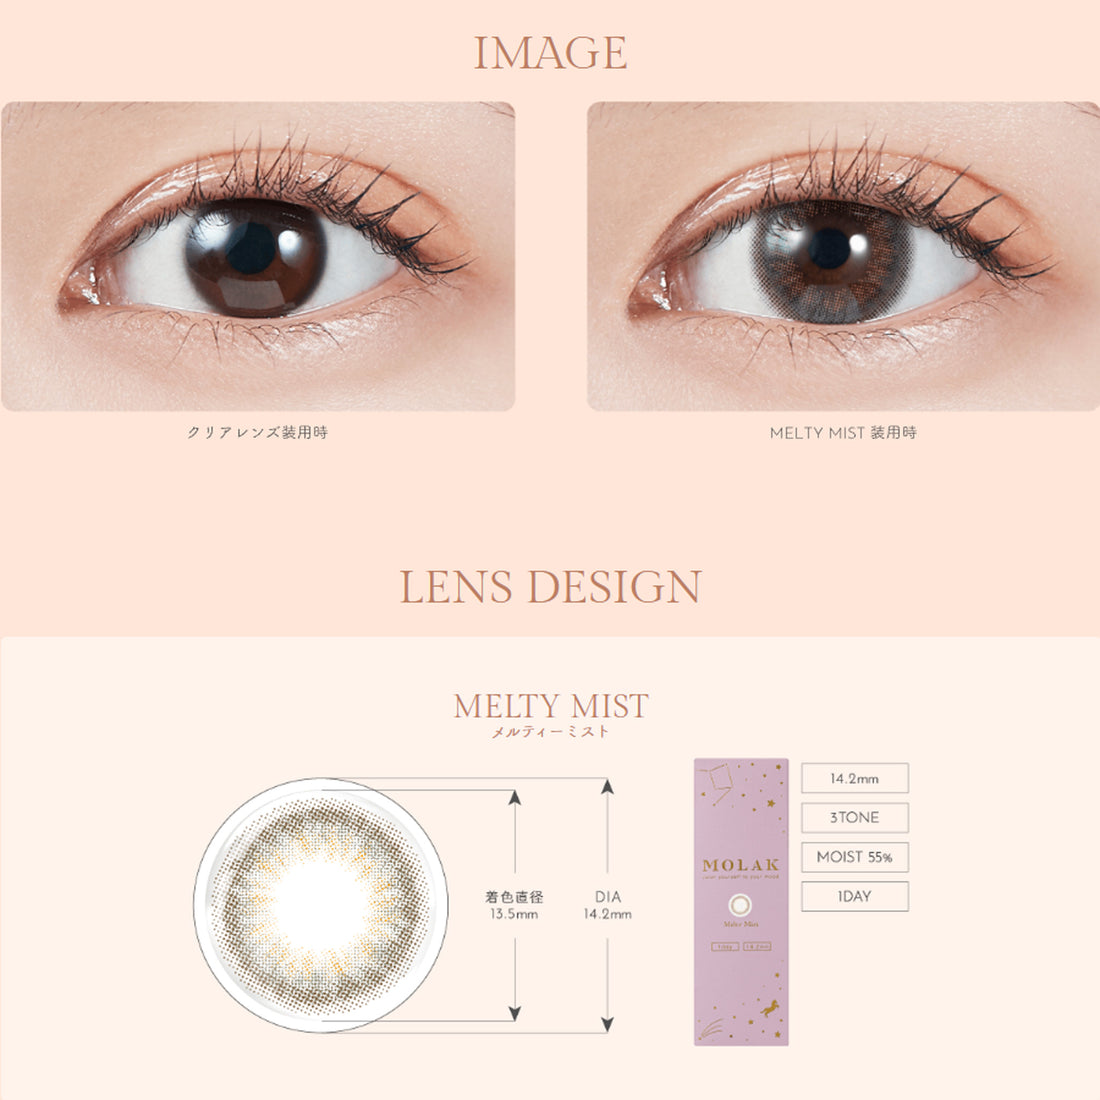 MOLAK Daily Contact Lenses-Melty Mist 10lenses